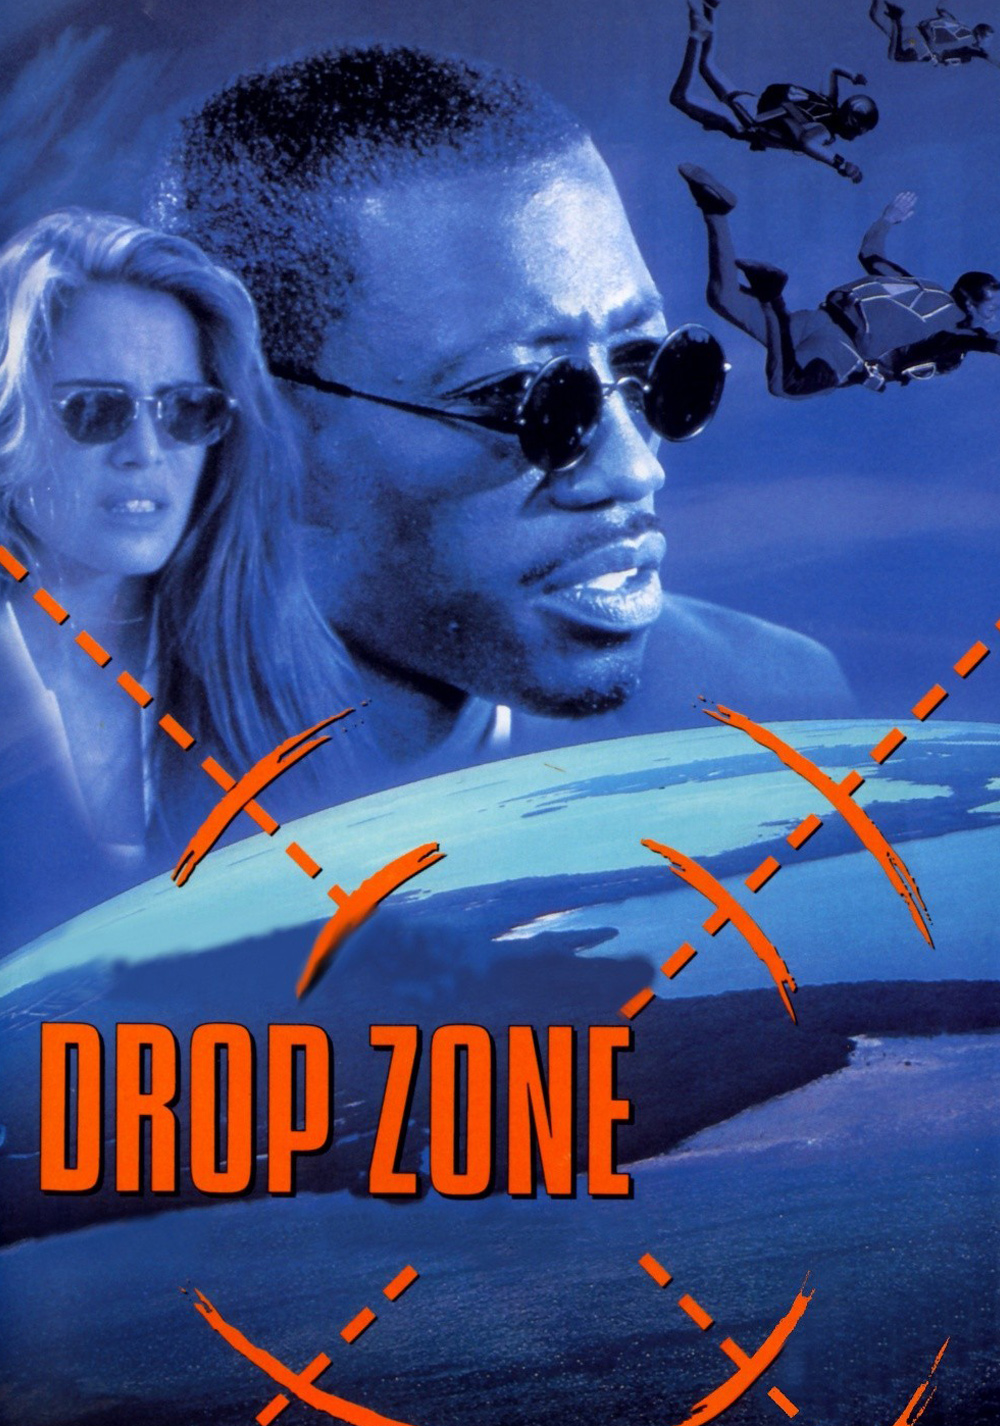 for mac download Dropzone 4